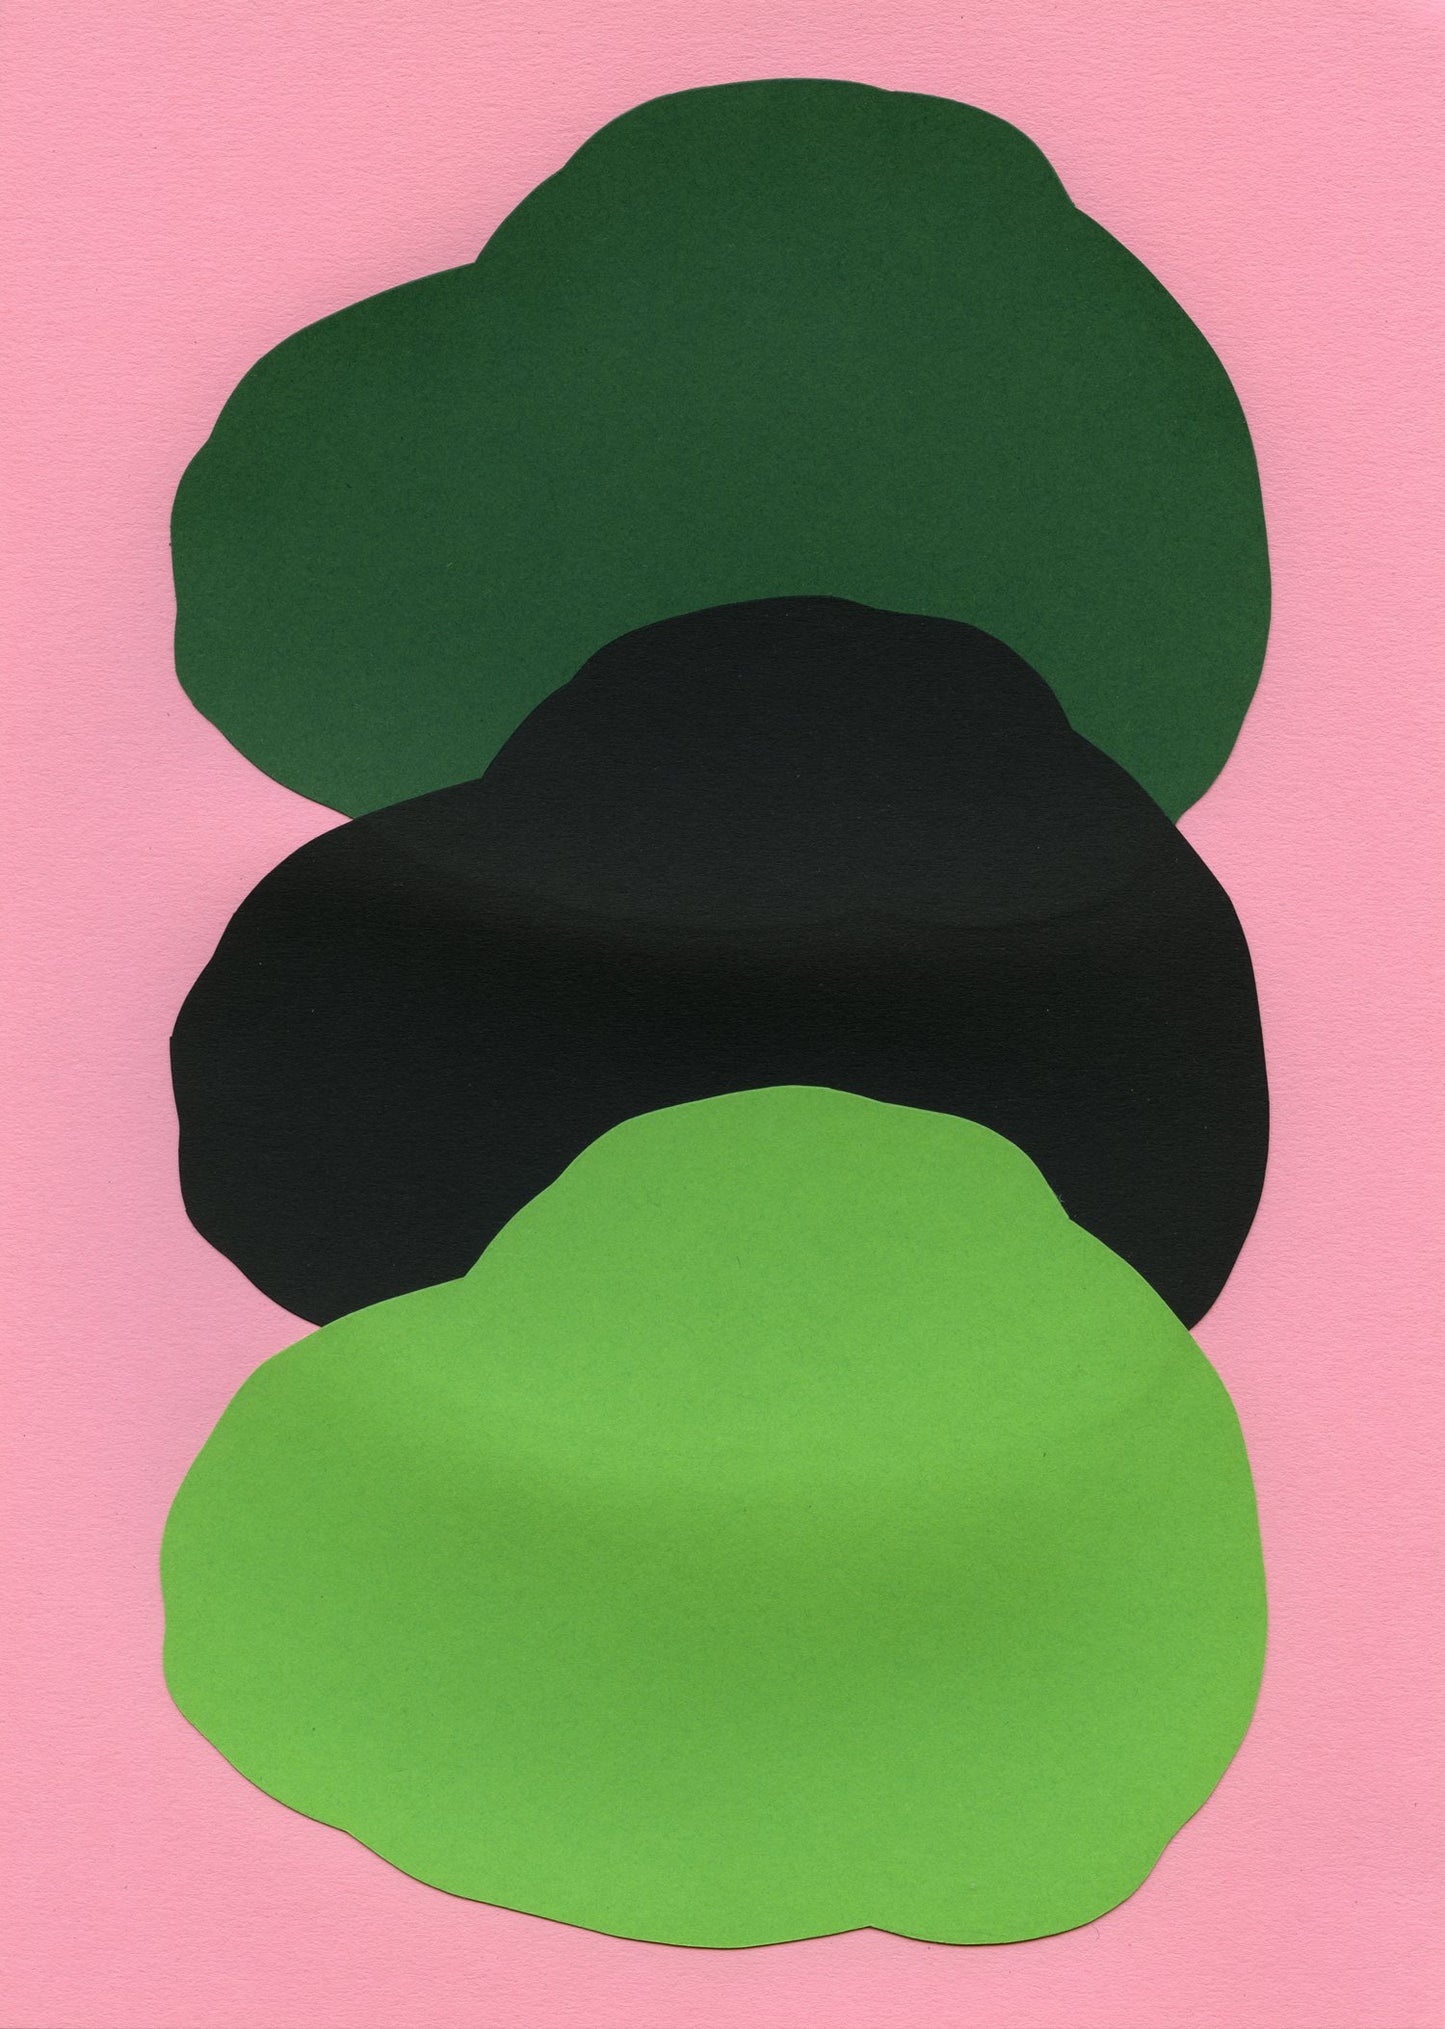 Dark Green, Black And Green On Pink